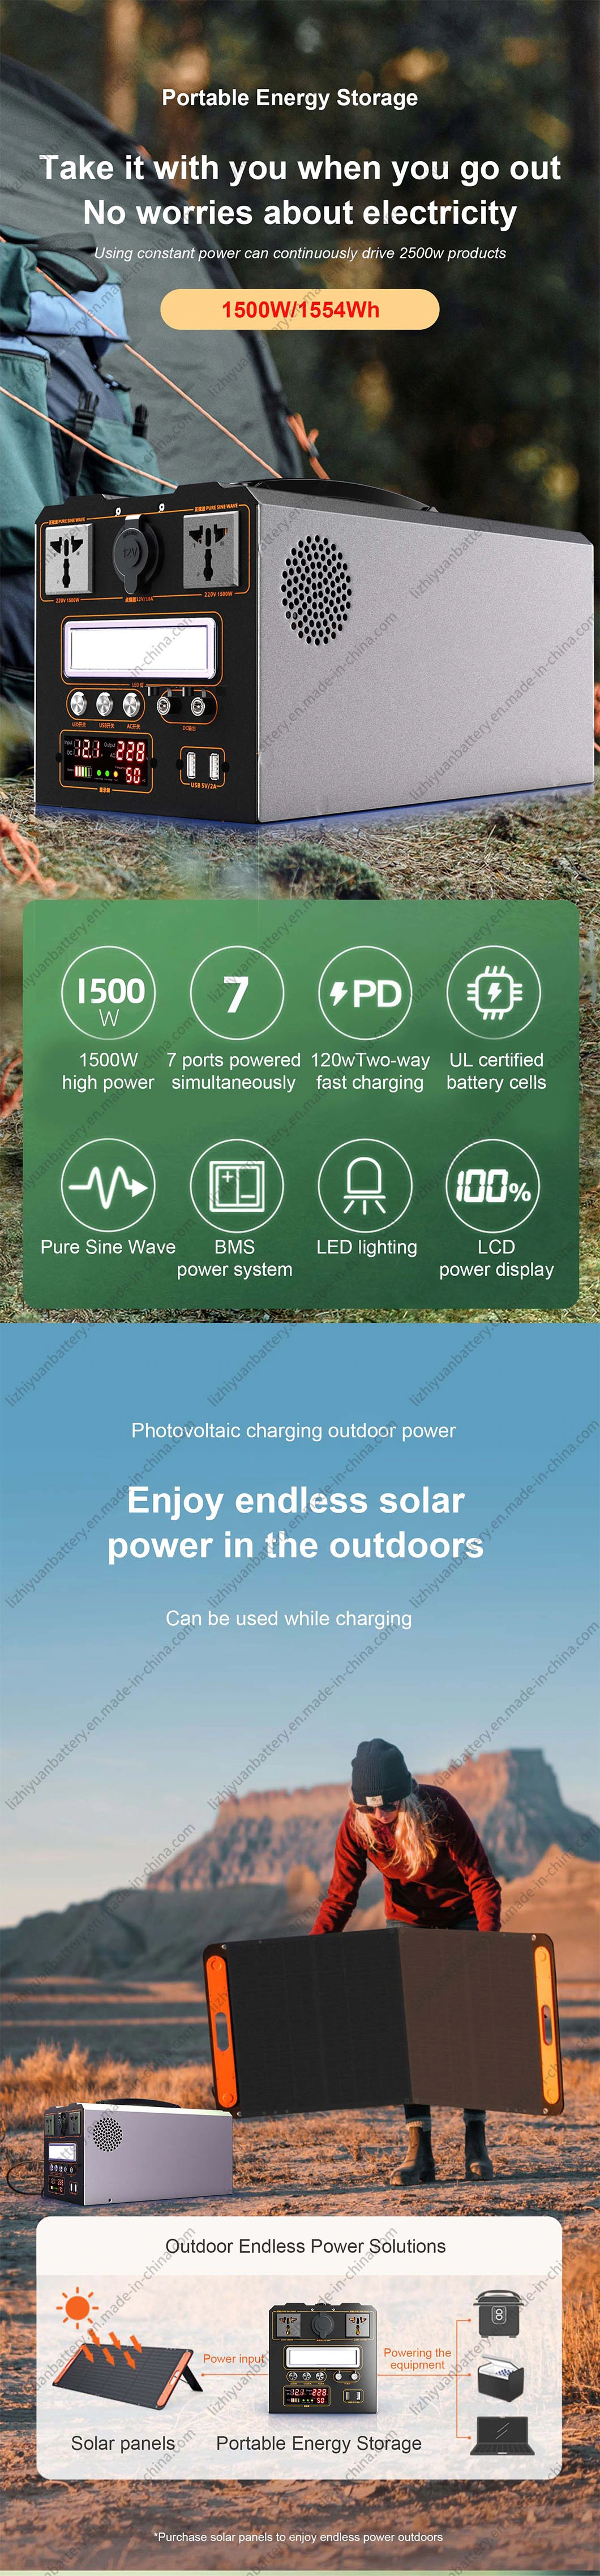 Large-Capacity Lithium Battery Power Supply 1500W Solar Power Bank Indoor Standby Outdoor Camping Portable Power Station